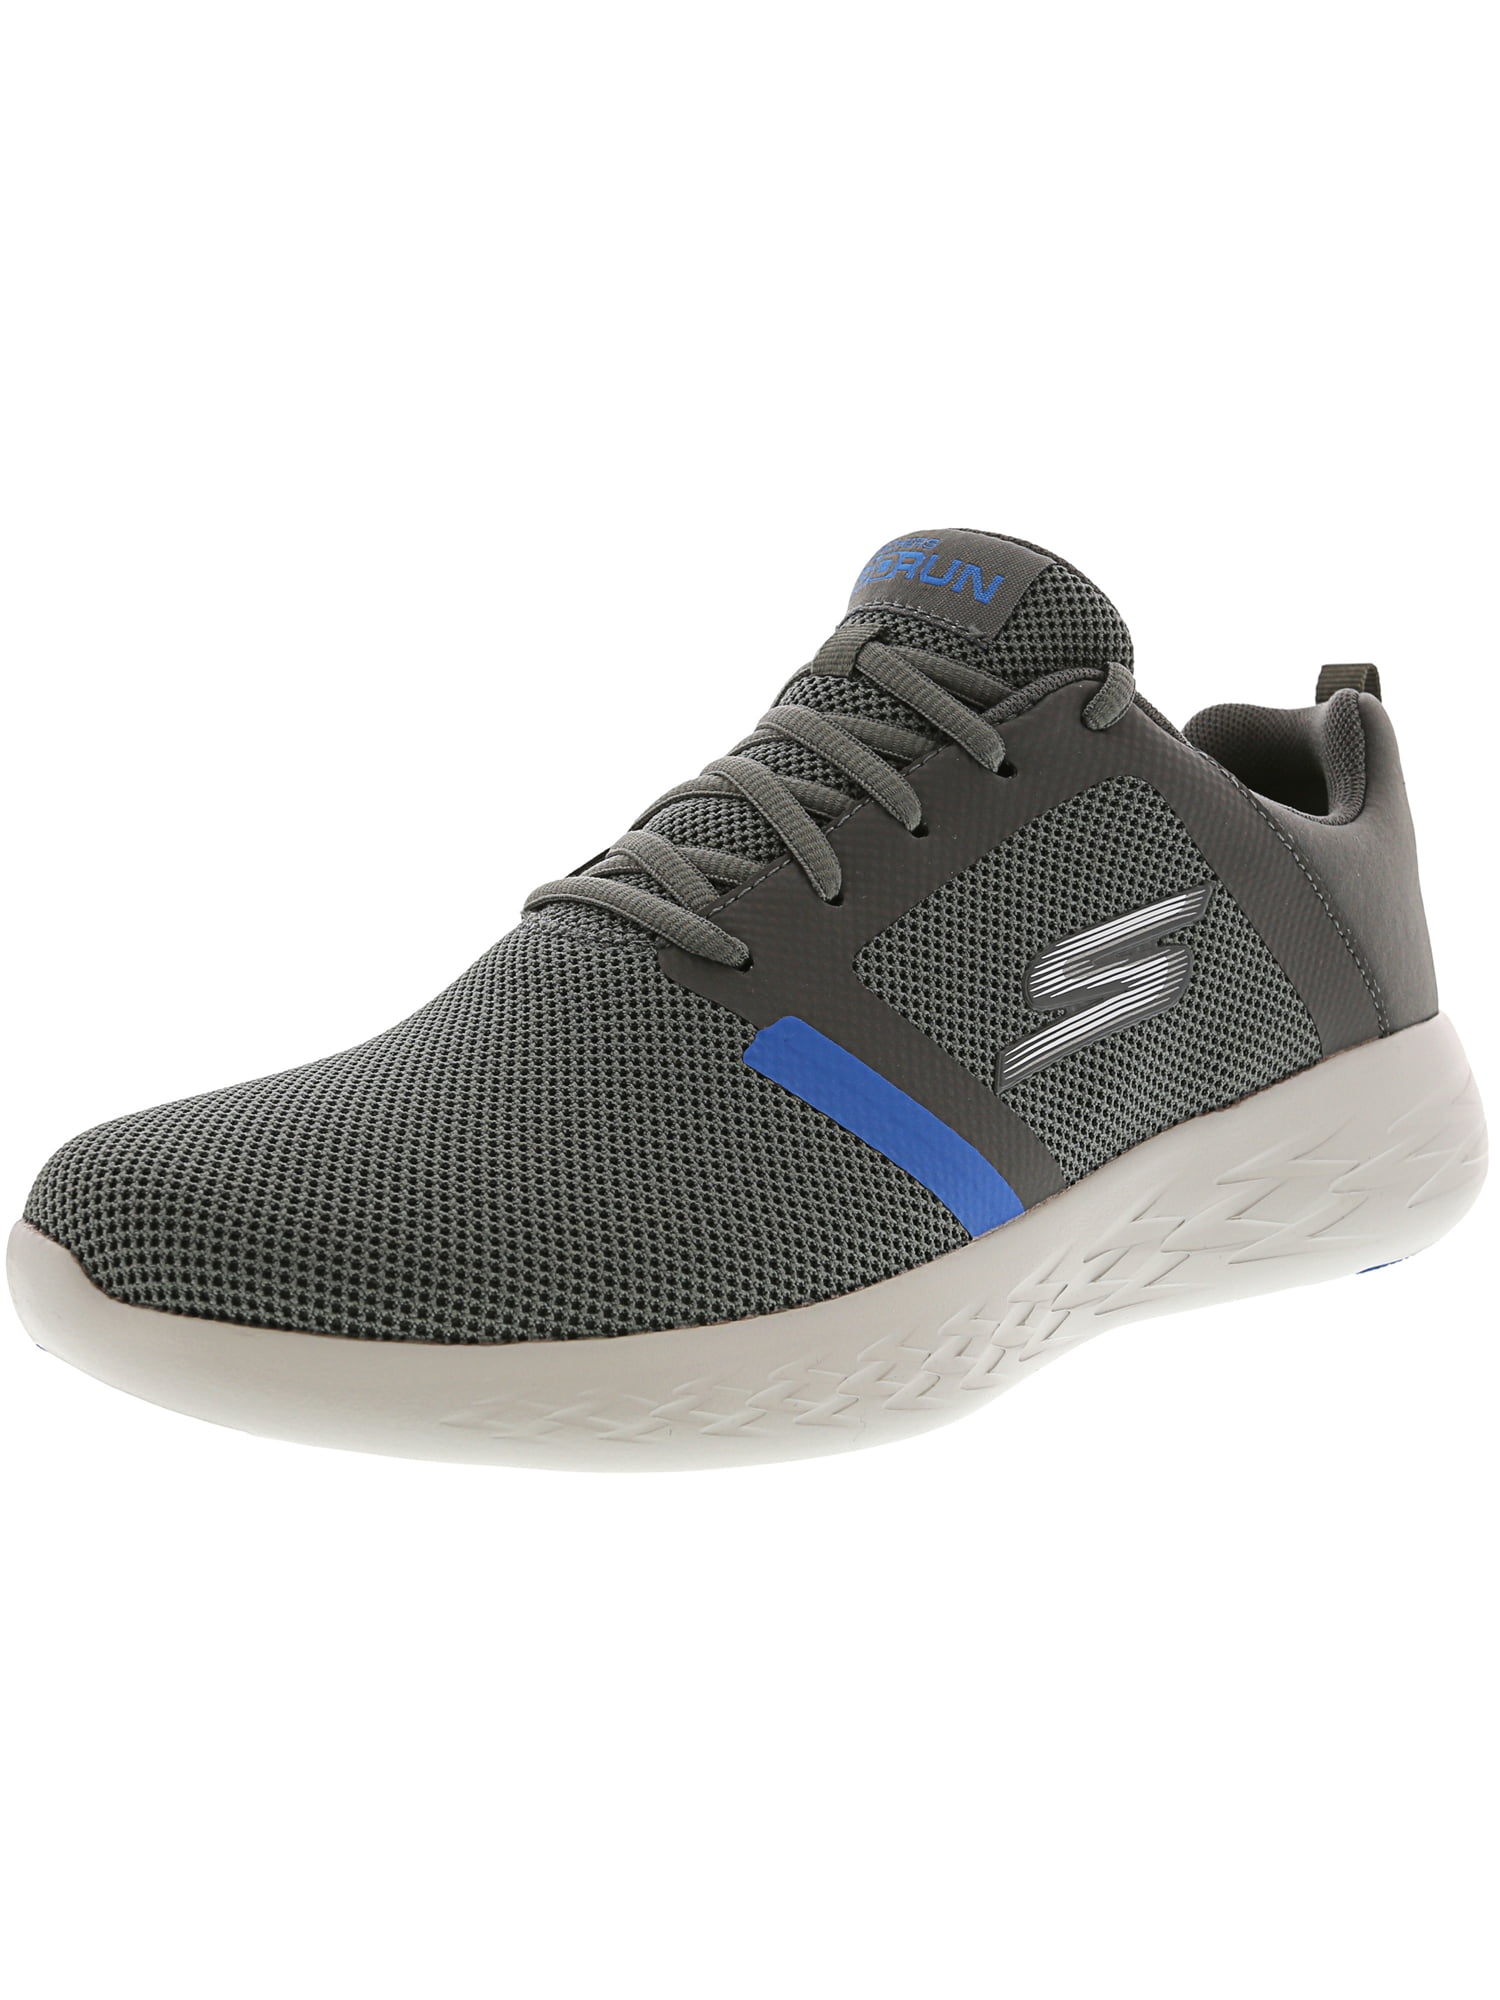 Blue Ankle-High Running Shoe 